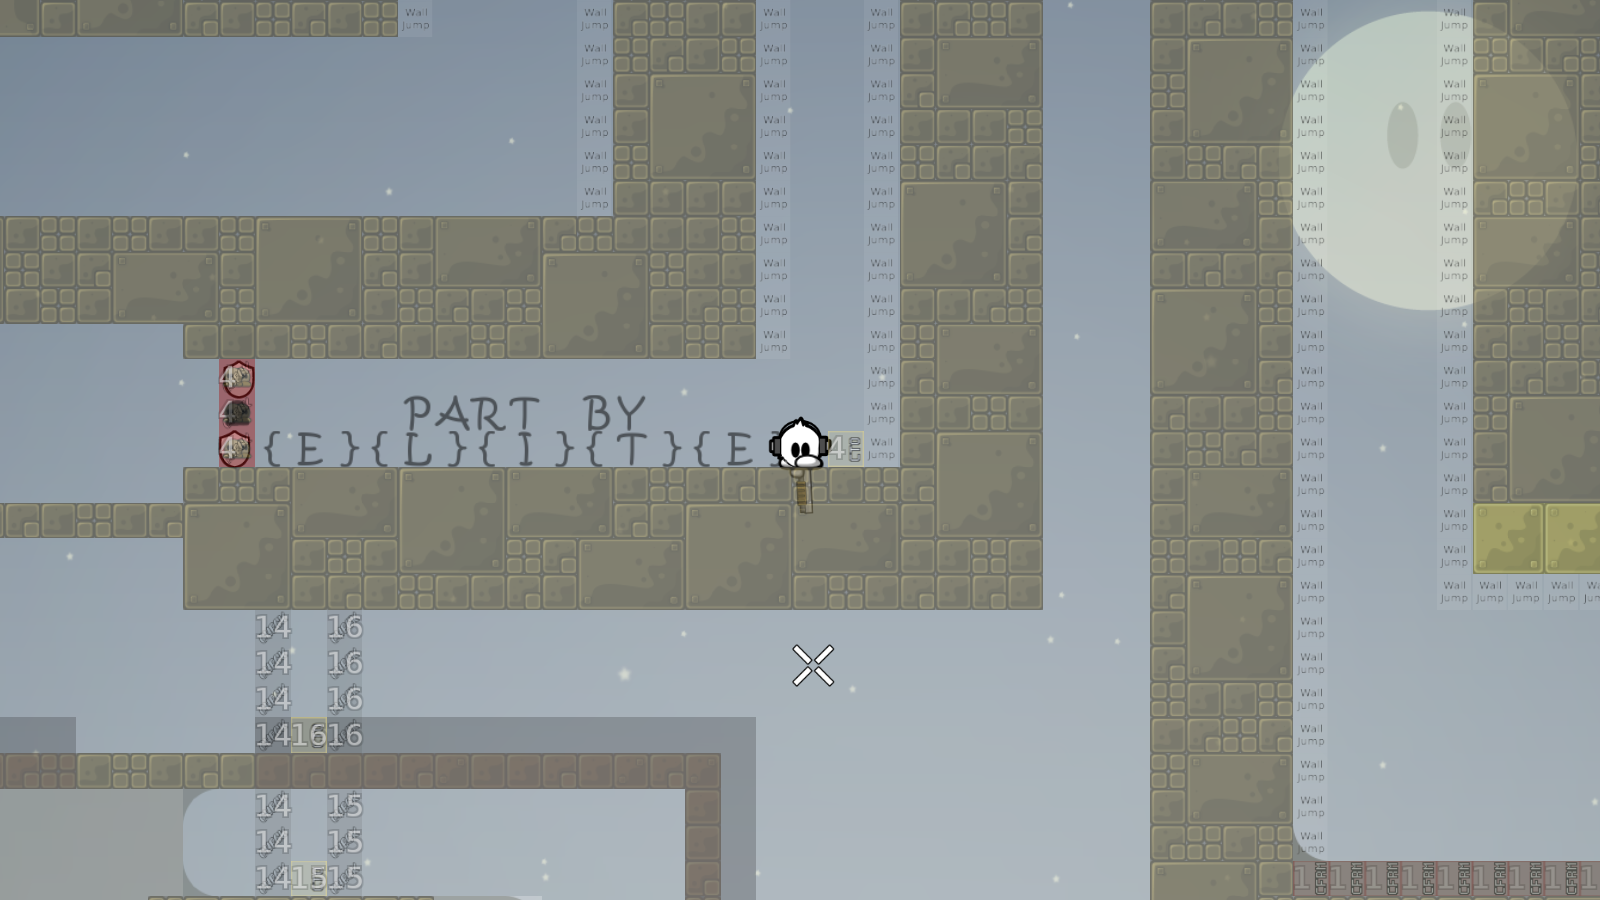 somehow mark the walljump-tiles or write at the beginning that it's walljump or something like that